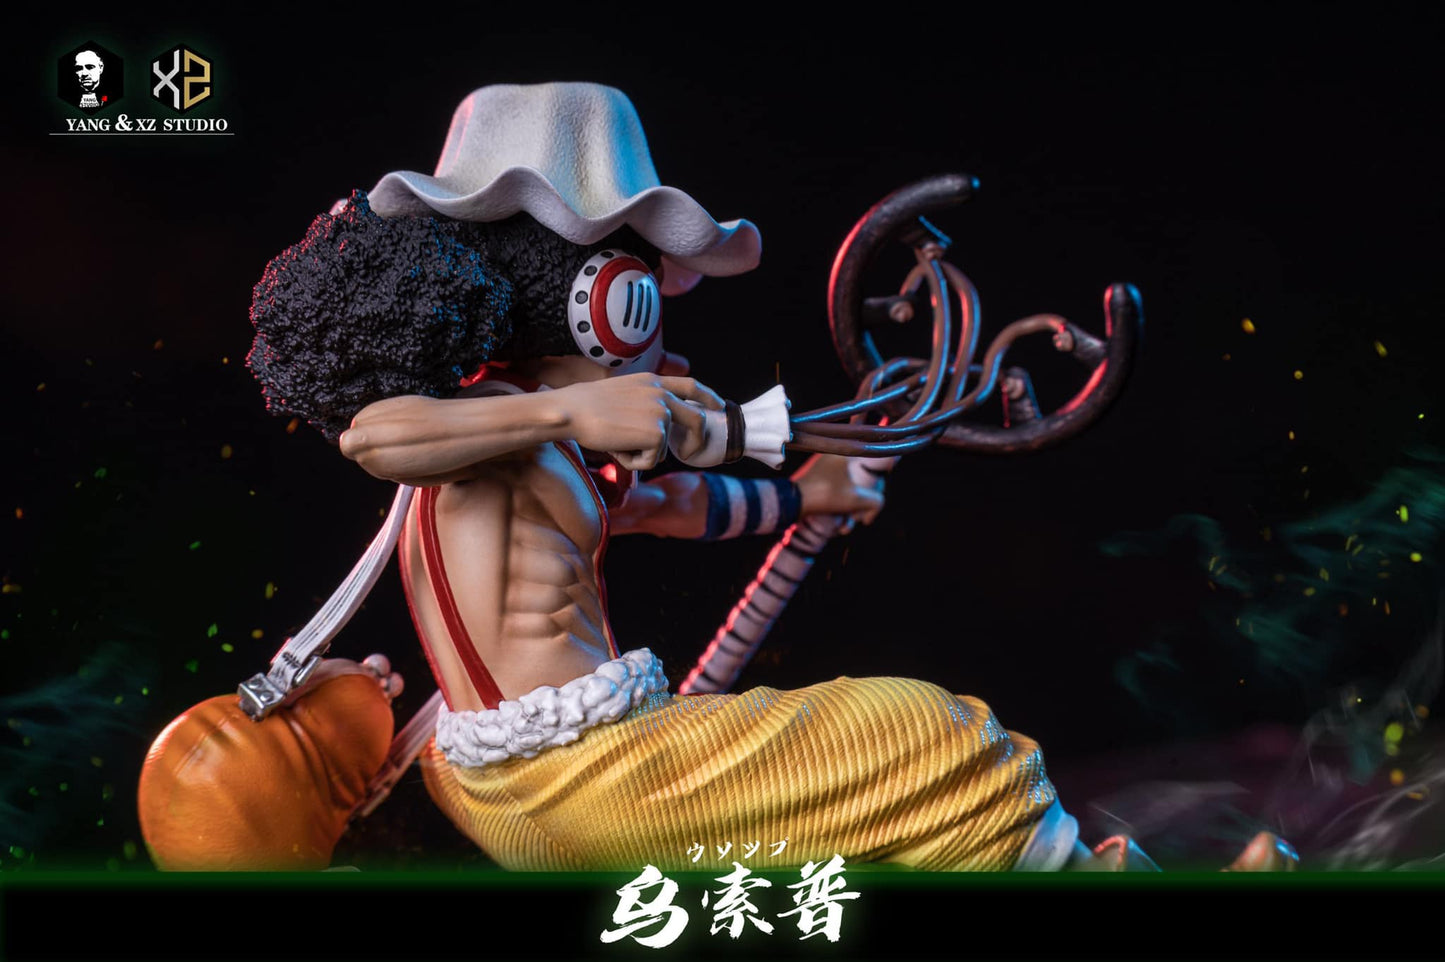 XS x YANG STUDIO – ONE PIECE: STRAW HAT PIRATES, USOPP [SOLD OUT]